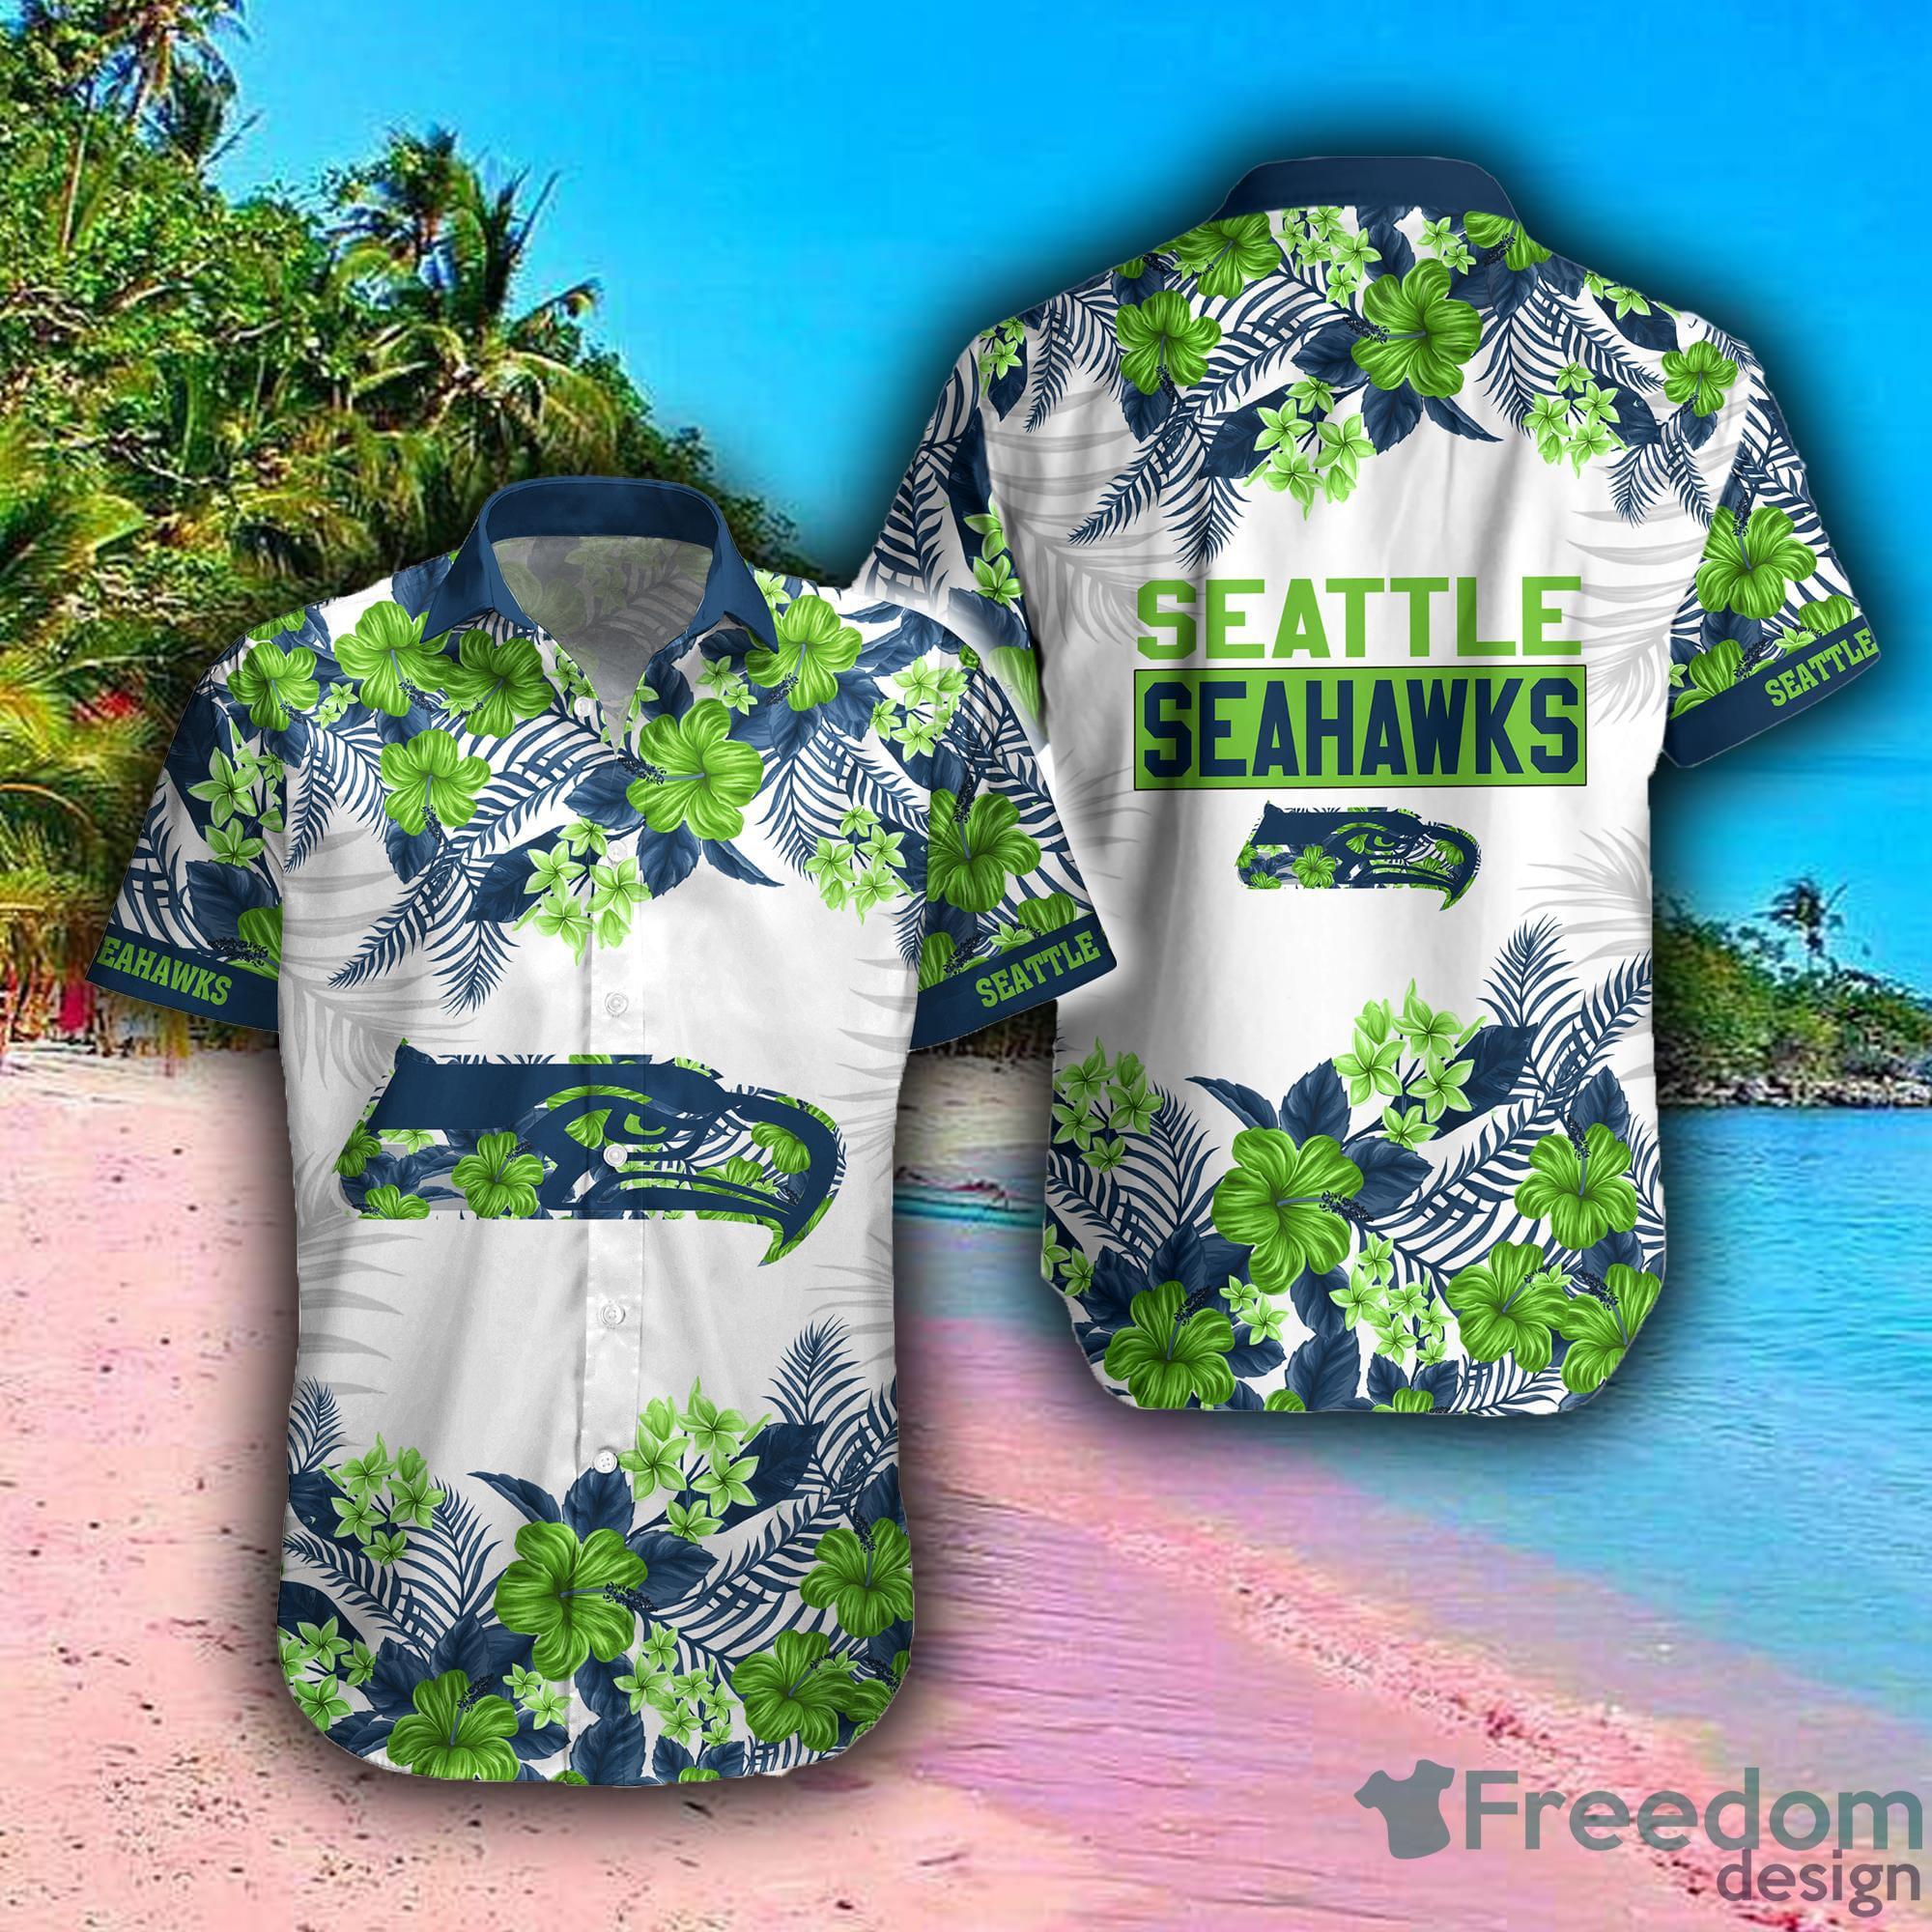 Seattle seahawks 3D Hawaiian Shirt And Shorts For Men And Women Gift Fans -  Freedomdesign